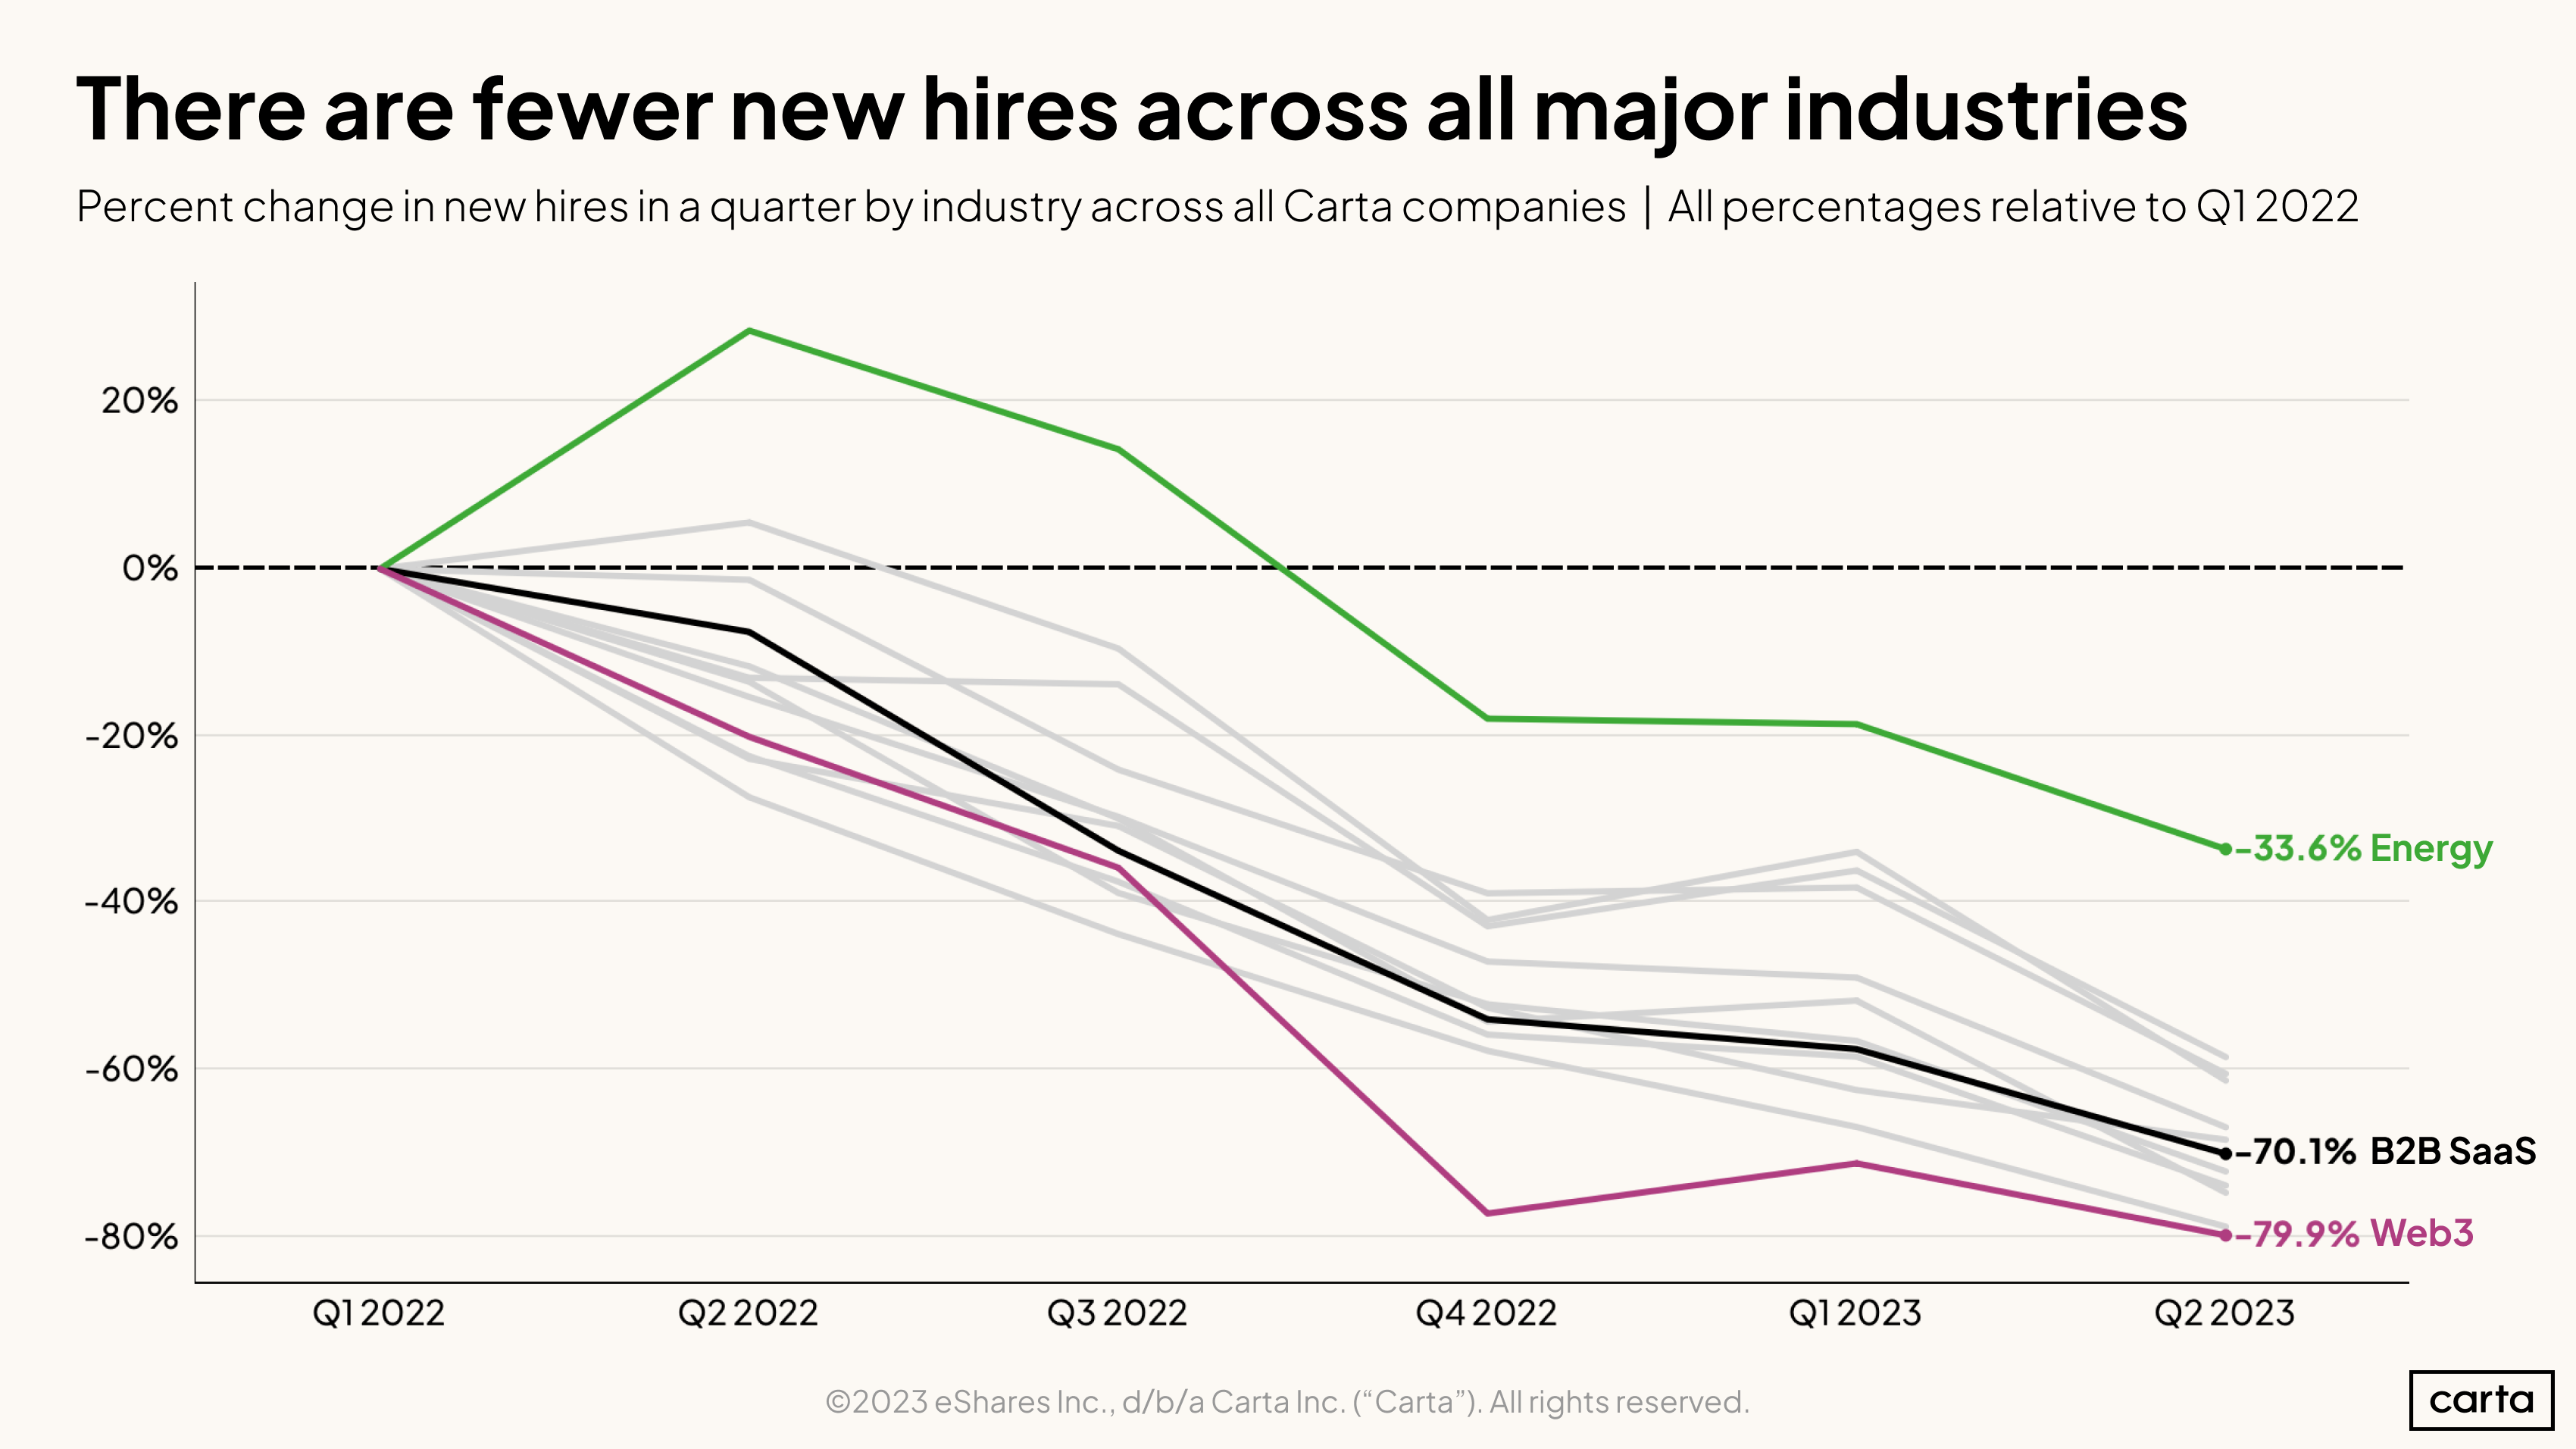 Percentage change in new hires by industry - H1 2023